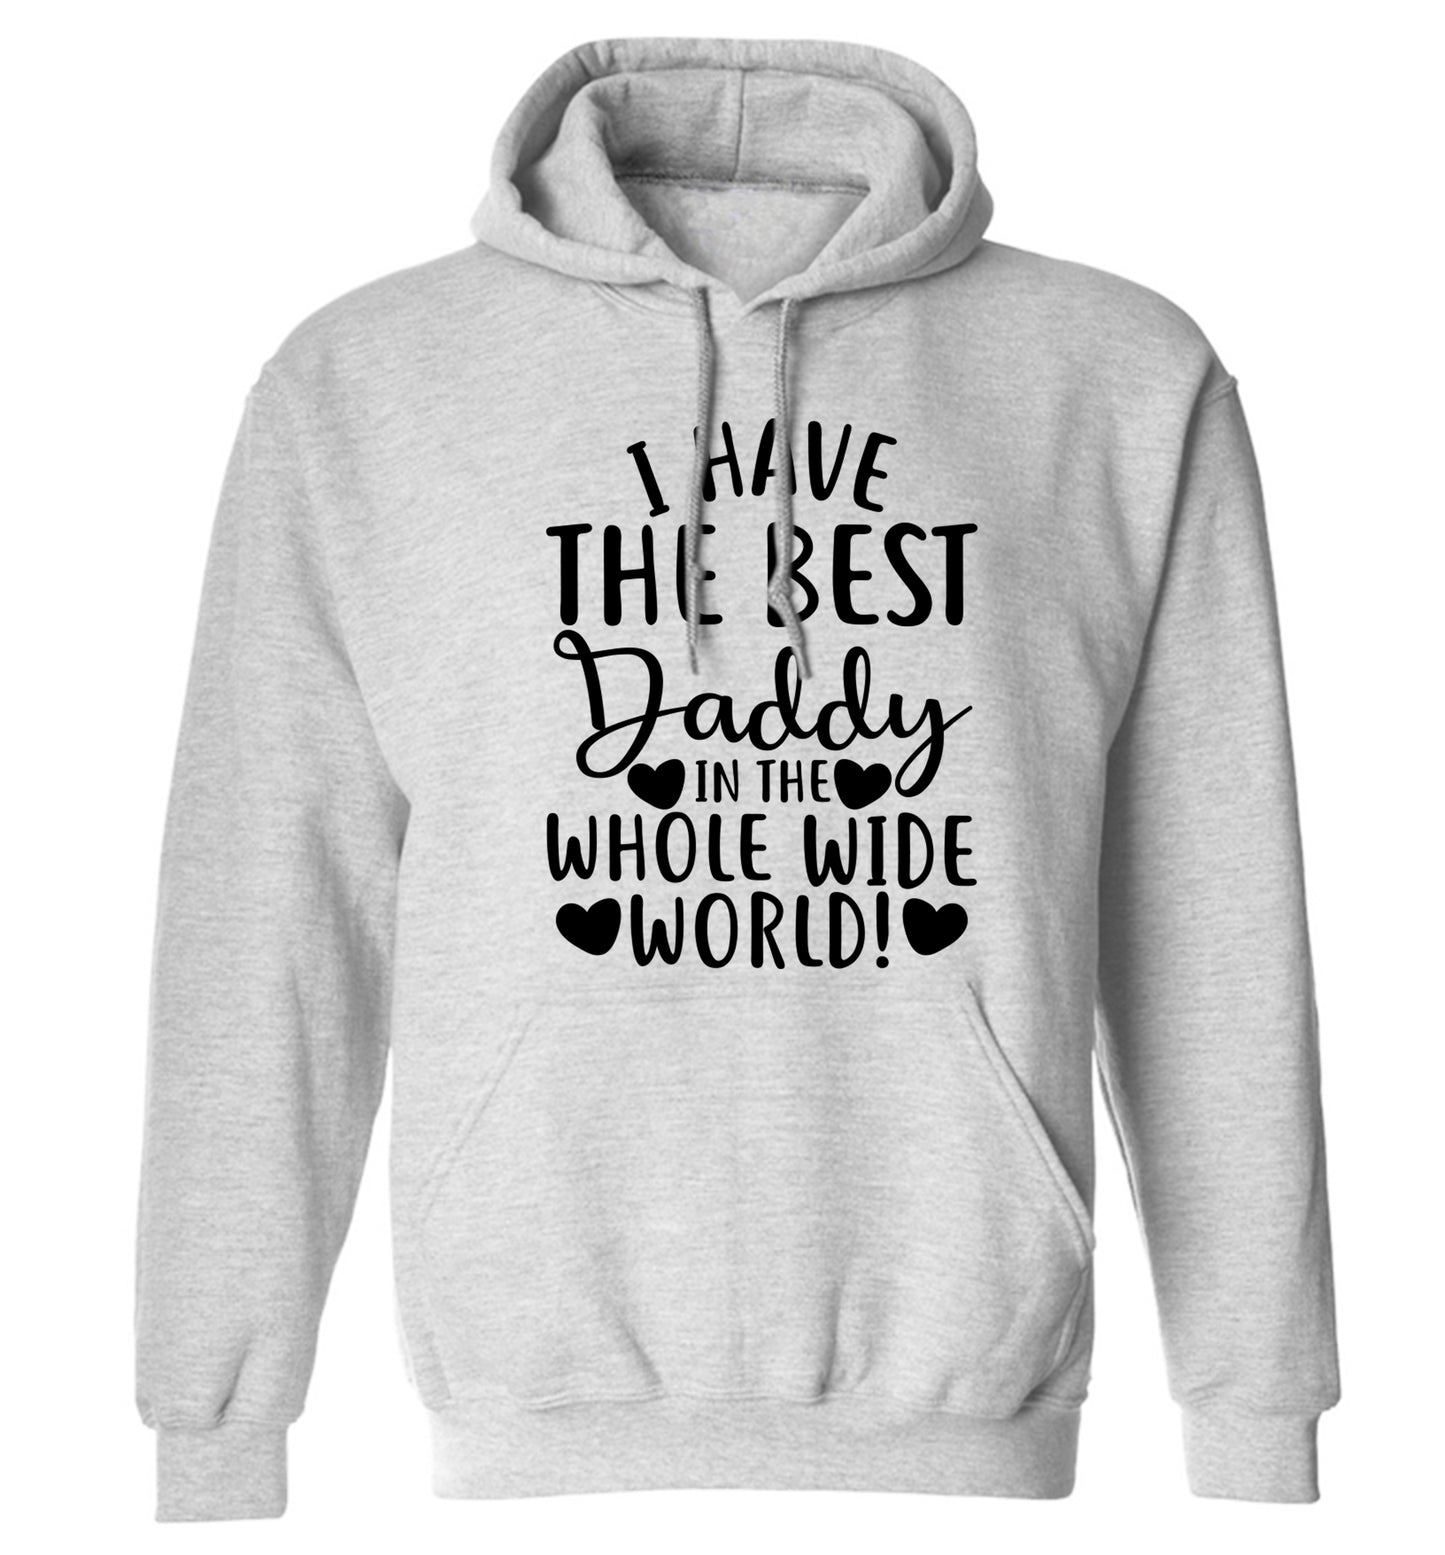 I have the best daddy in the whole wide world adults unisex grey hoodie 2XL